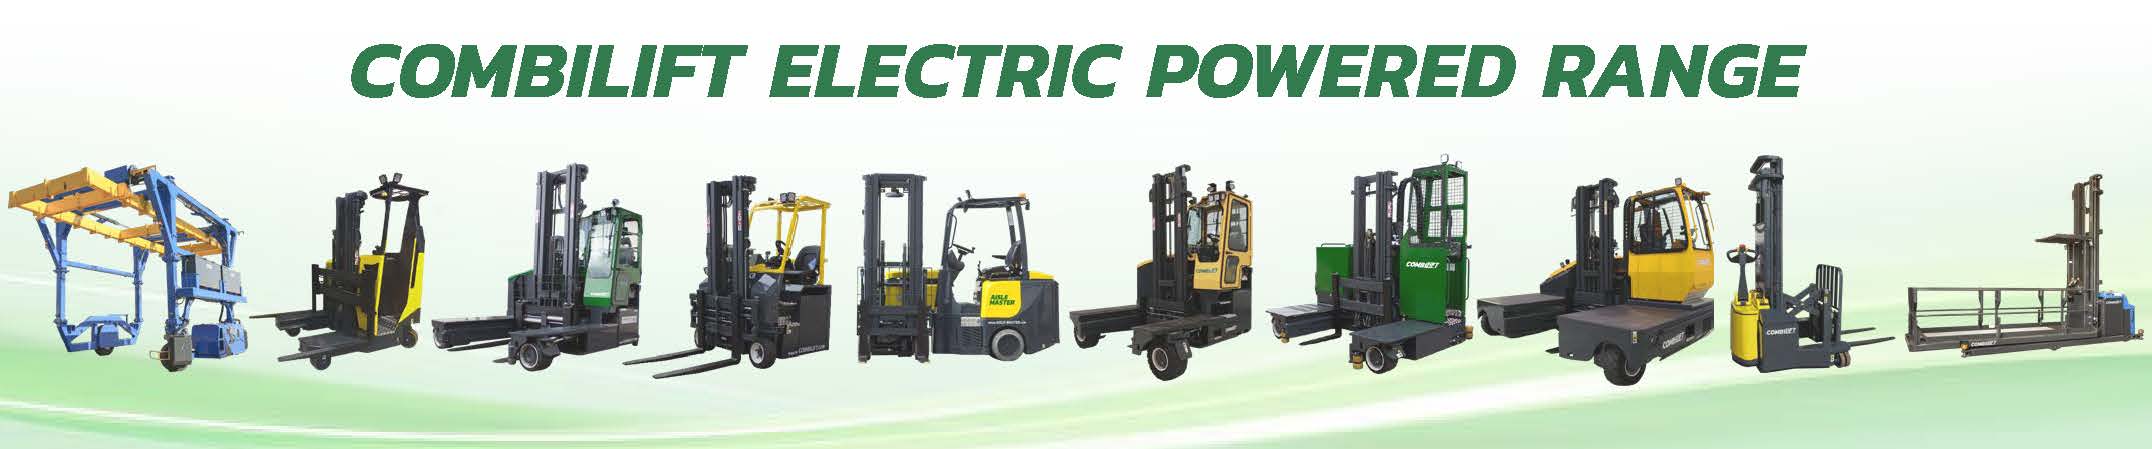 Electric Banner with Forklifts